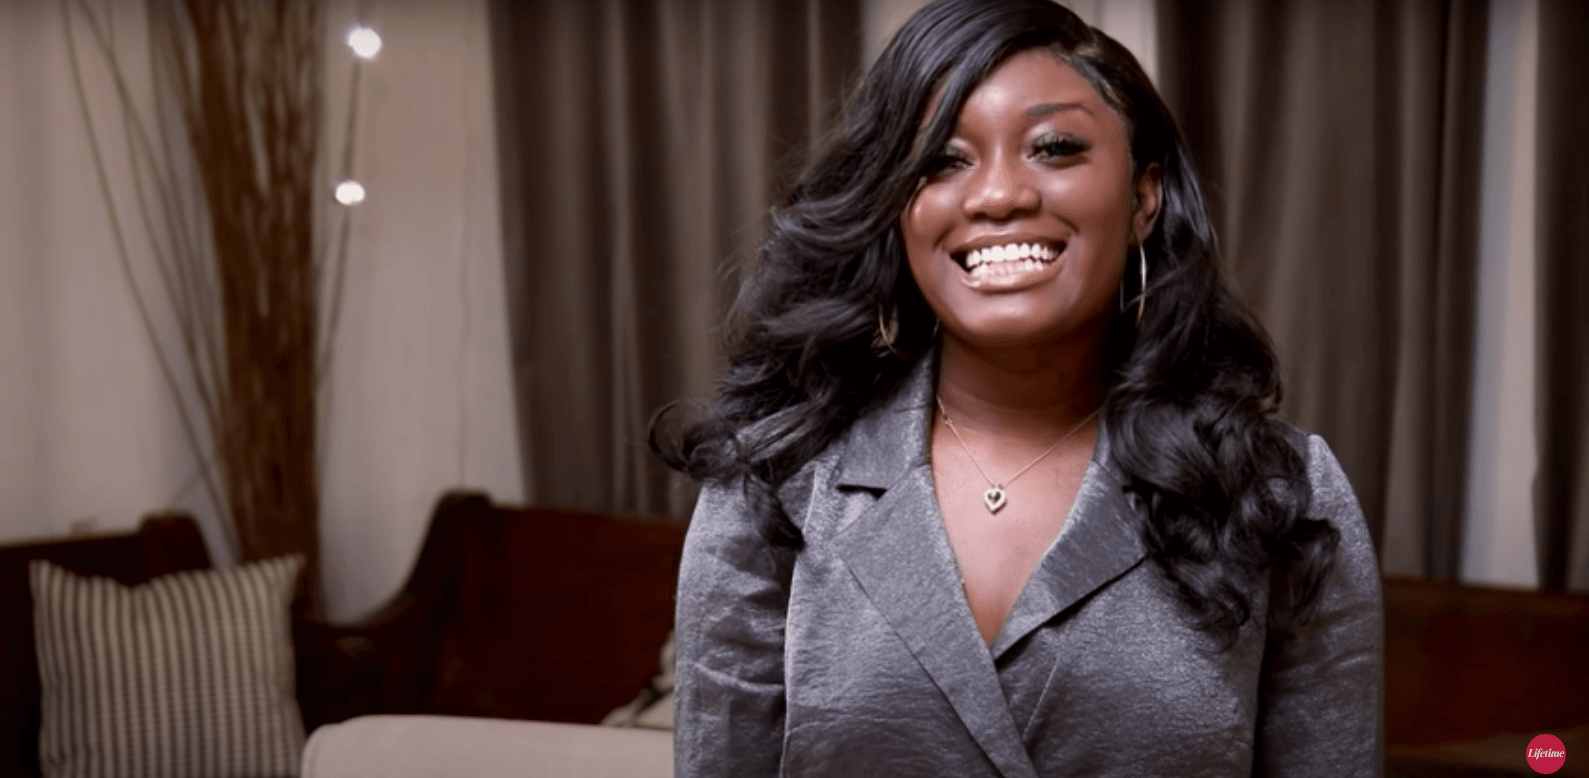 Smiling Paige Banks on 'Married at First Sight' Season 12